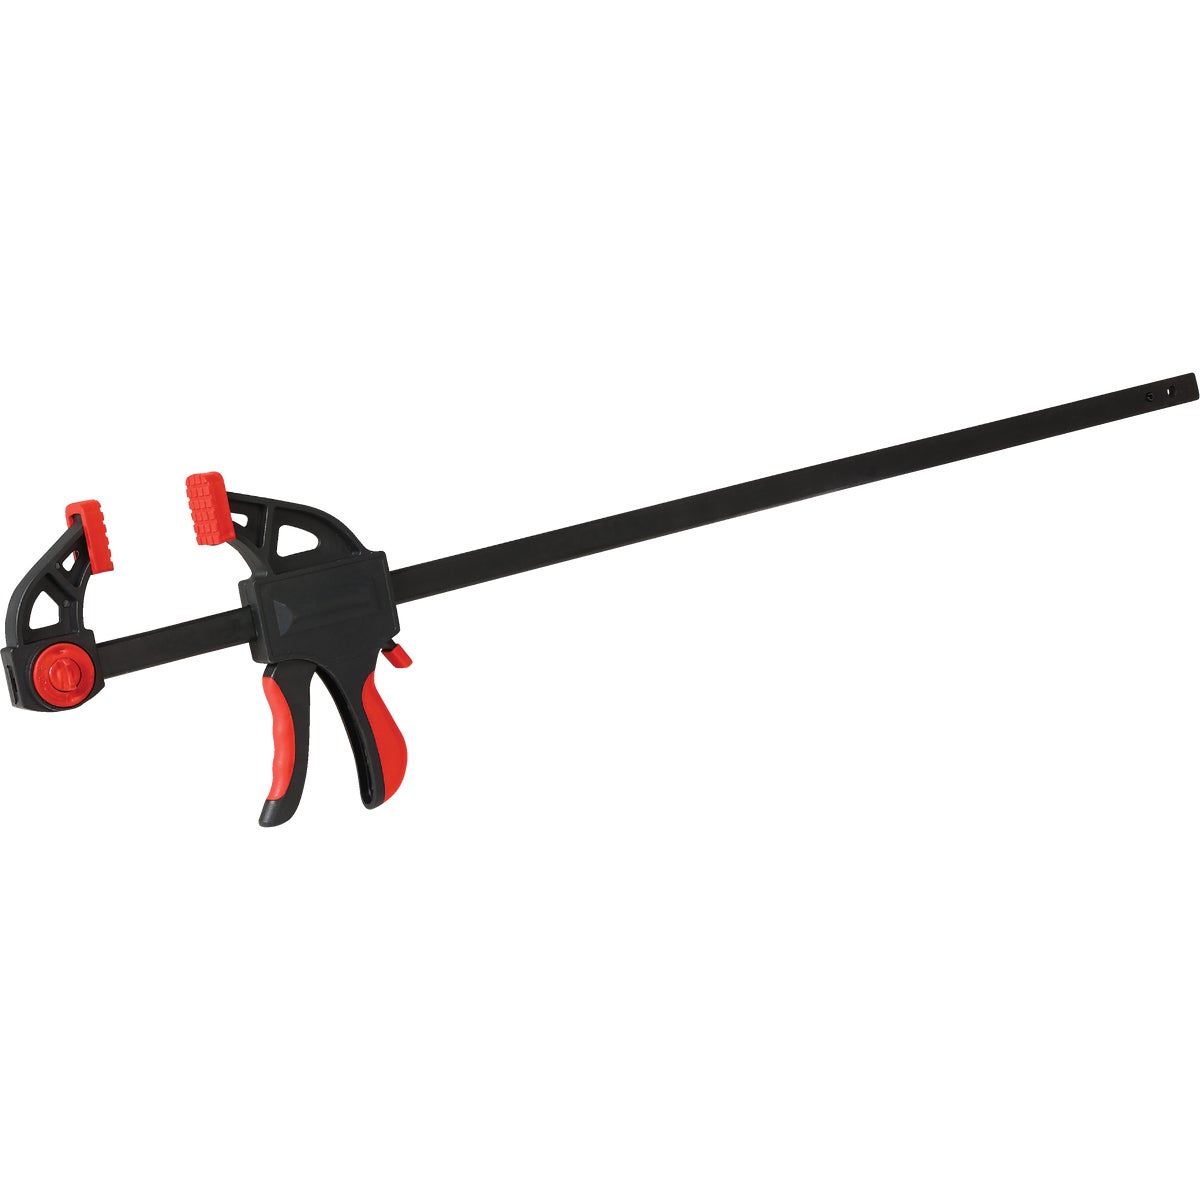 Do it Pistol Grip 24 In. One-Hand Bar Clamp and Spreader